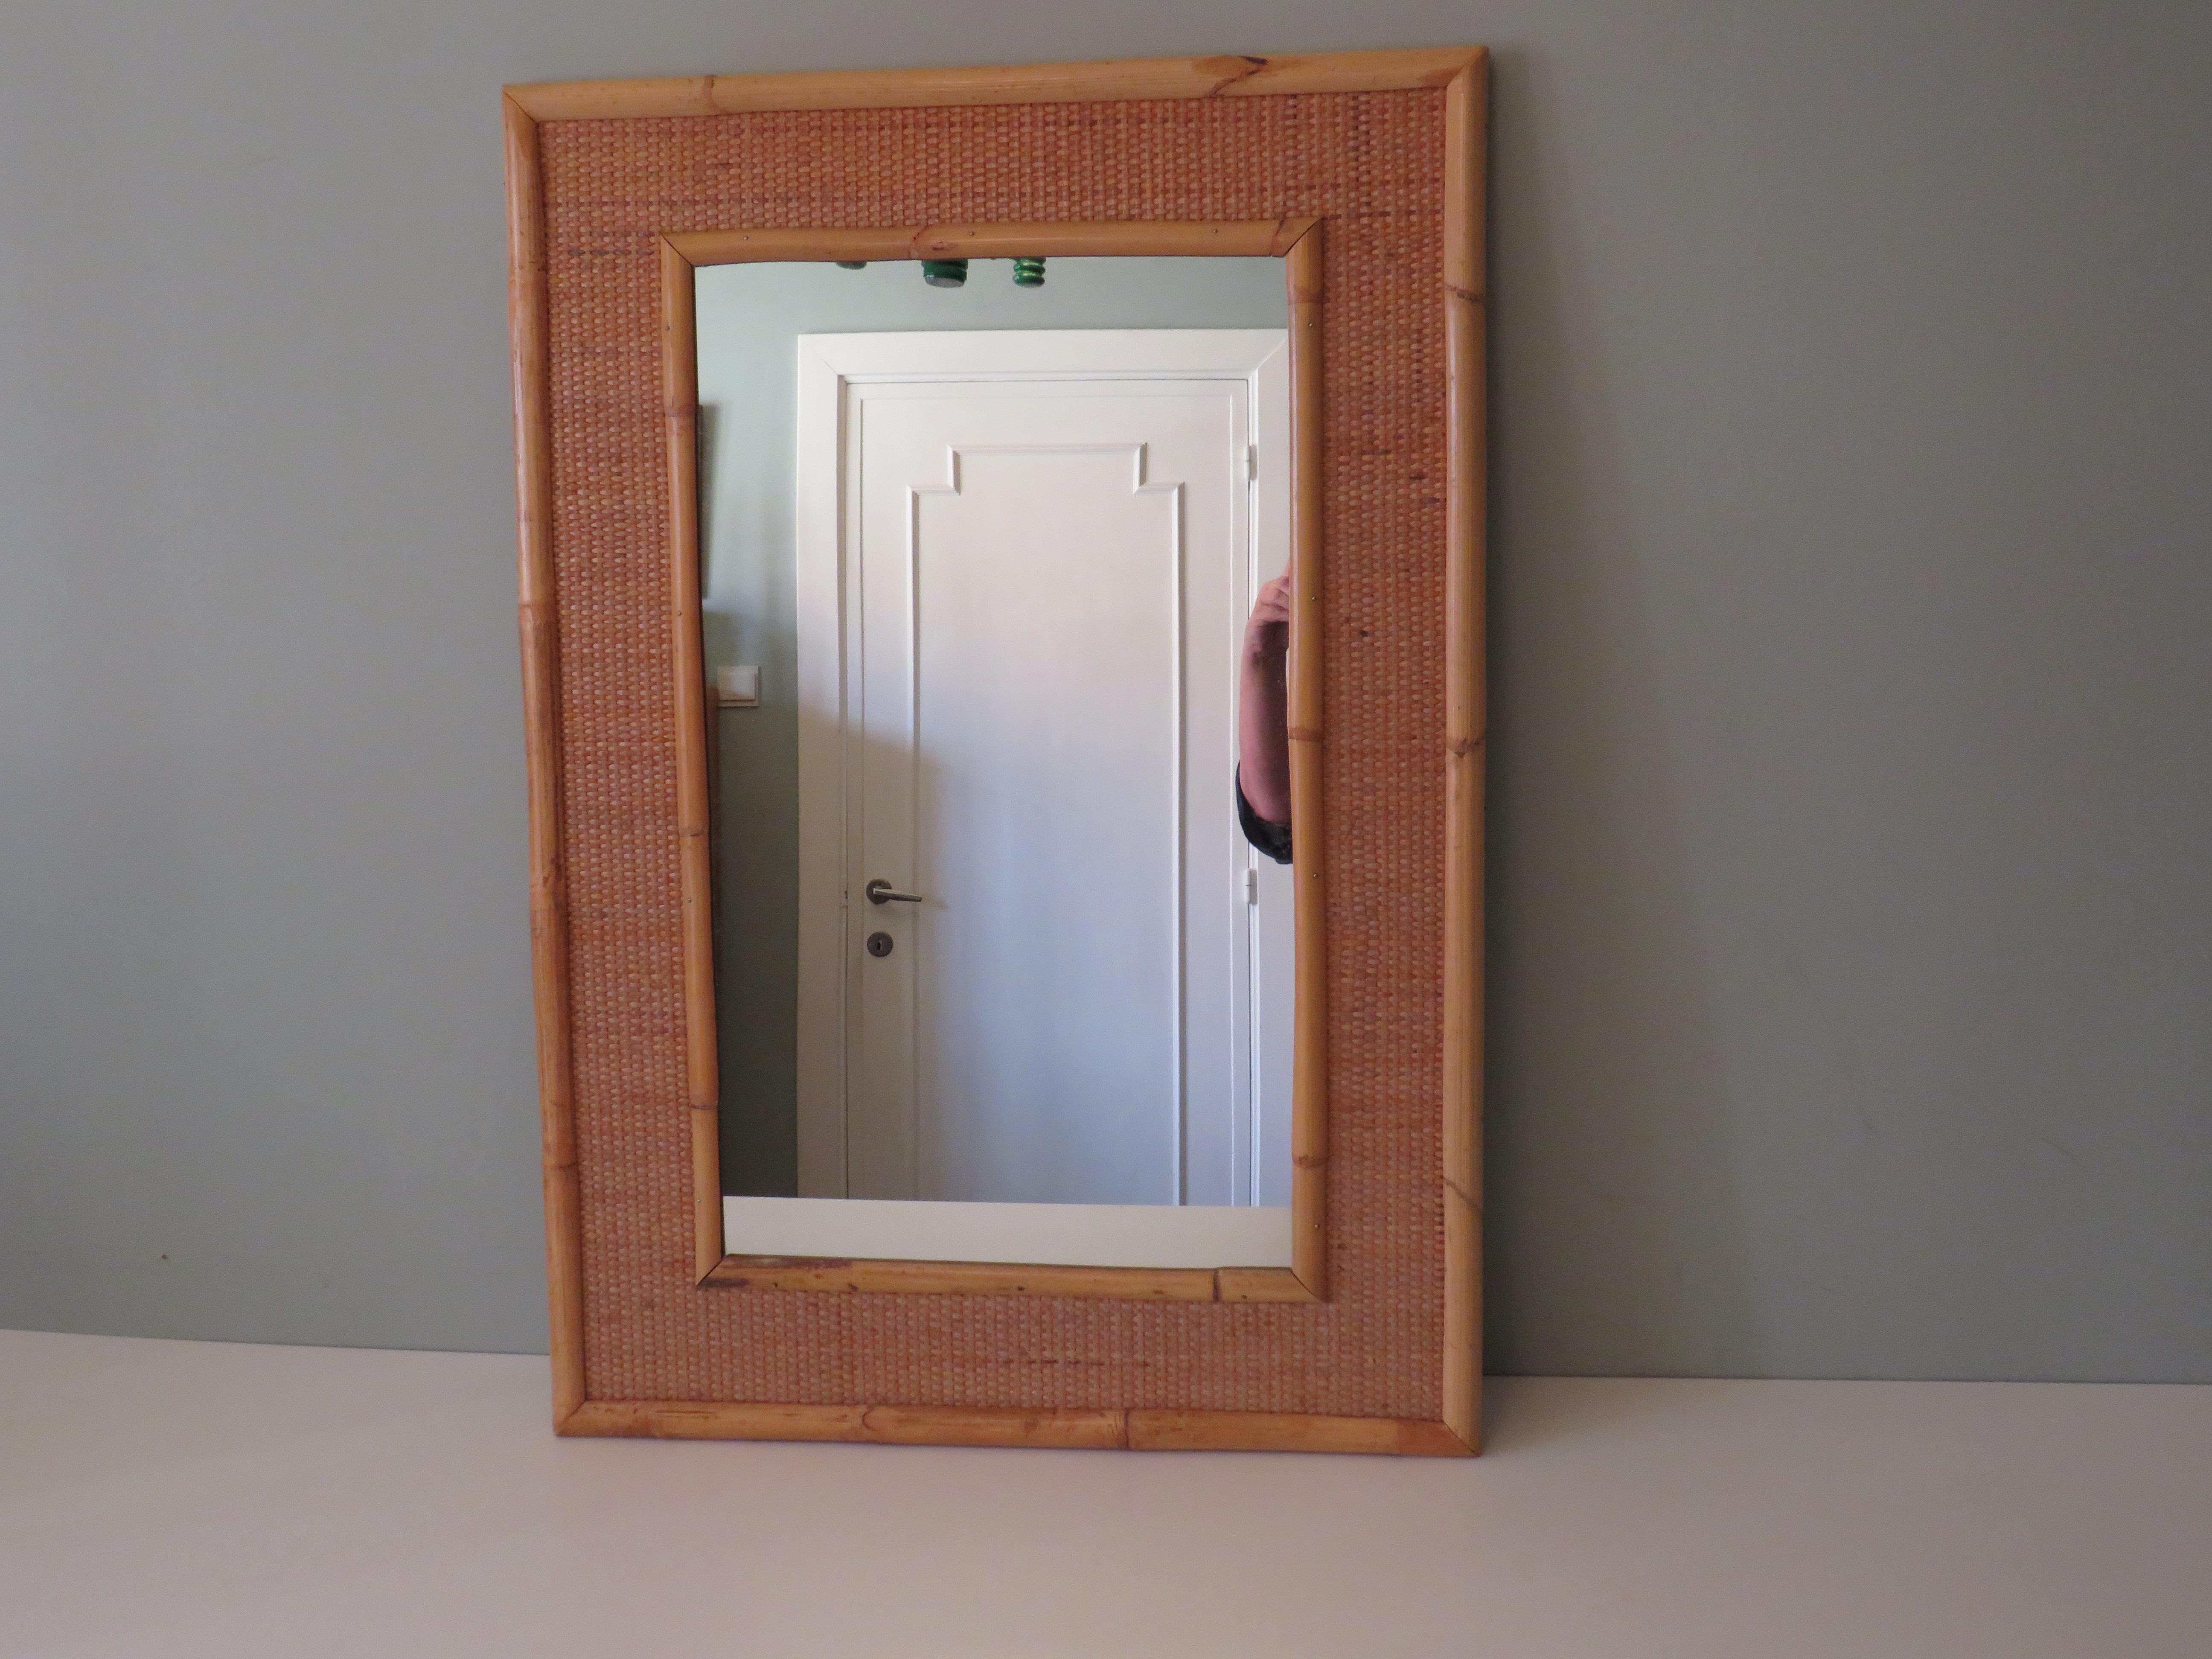 Very stylish, heavy and high-quality mirror in a bamboo and woven rattan frame.
The mirror can be hung horizontally or vertically, see photos of the back.
The mirror is in excellent condition.
And will be packed with the necessary care and